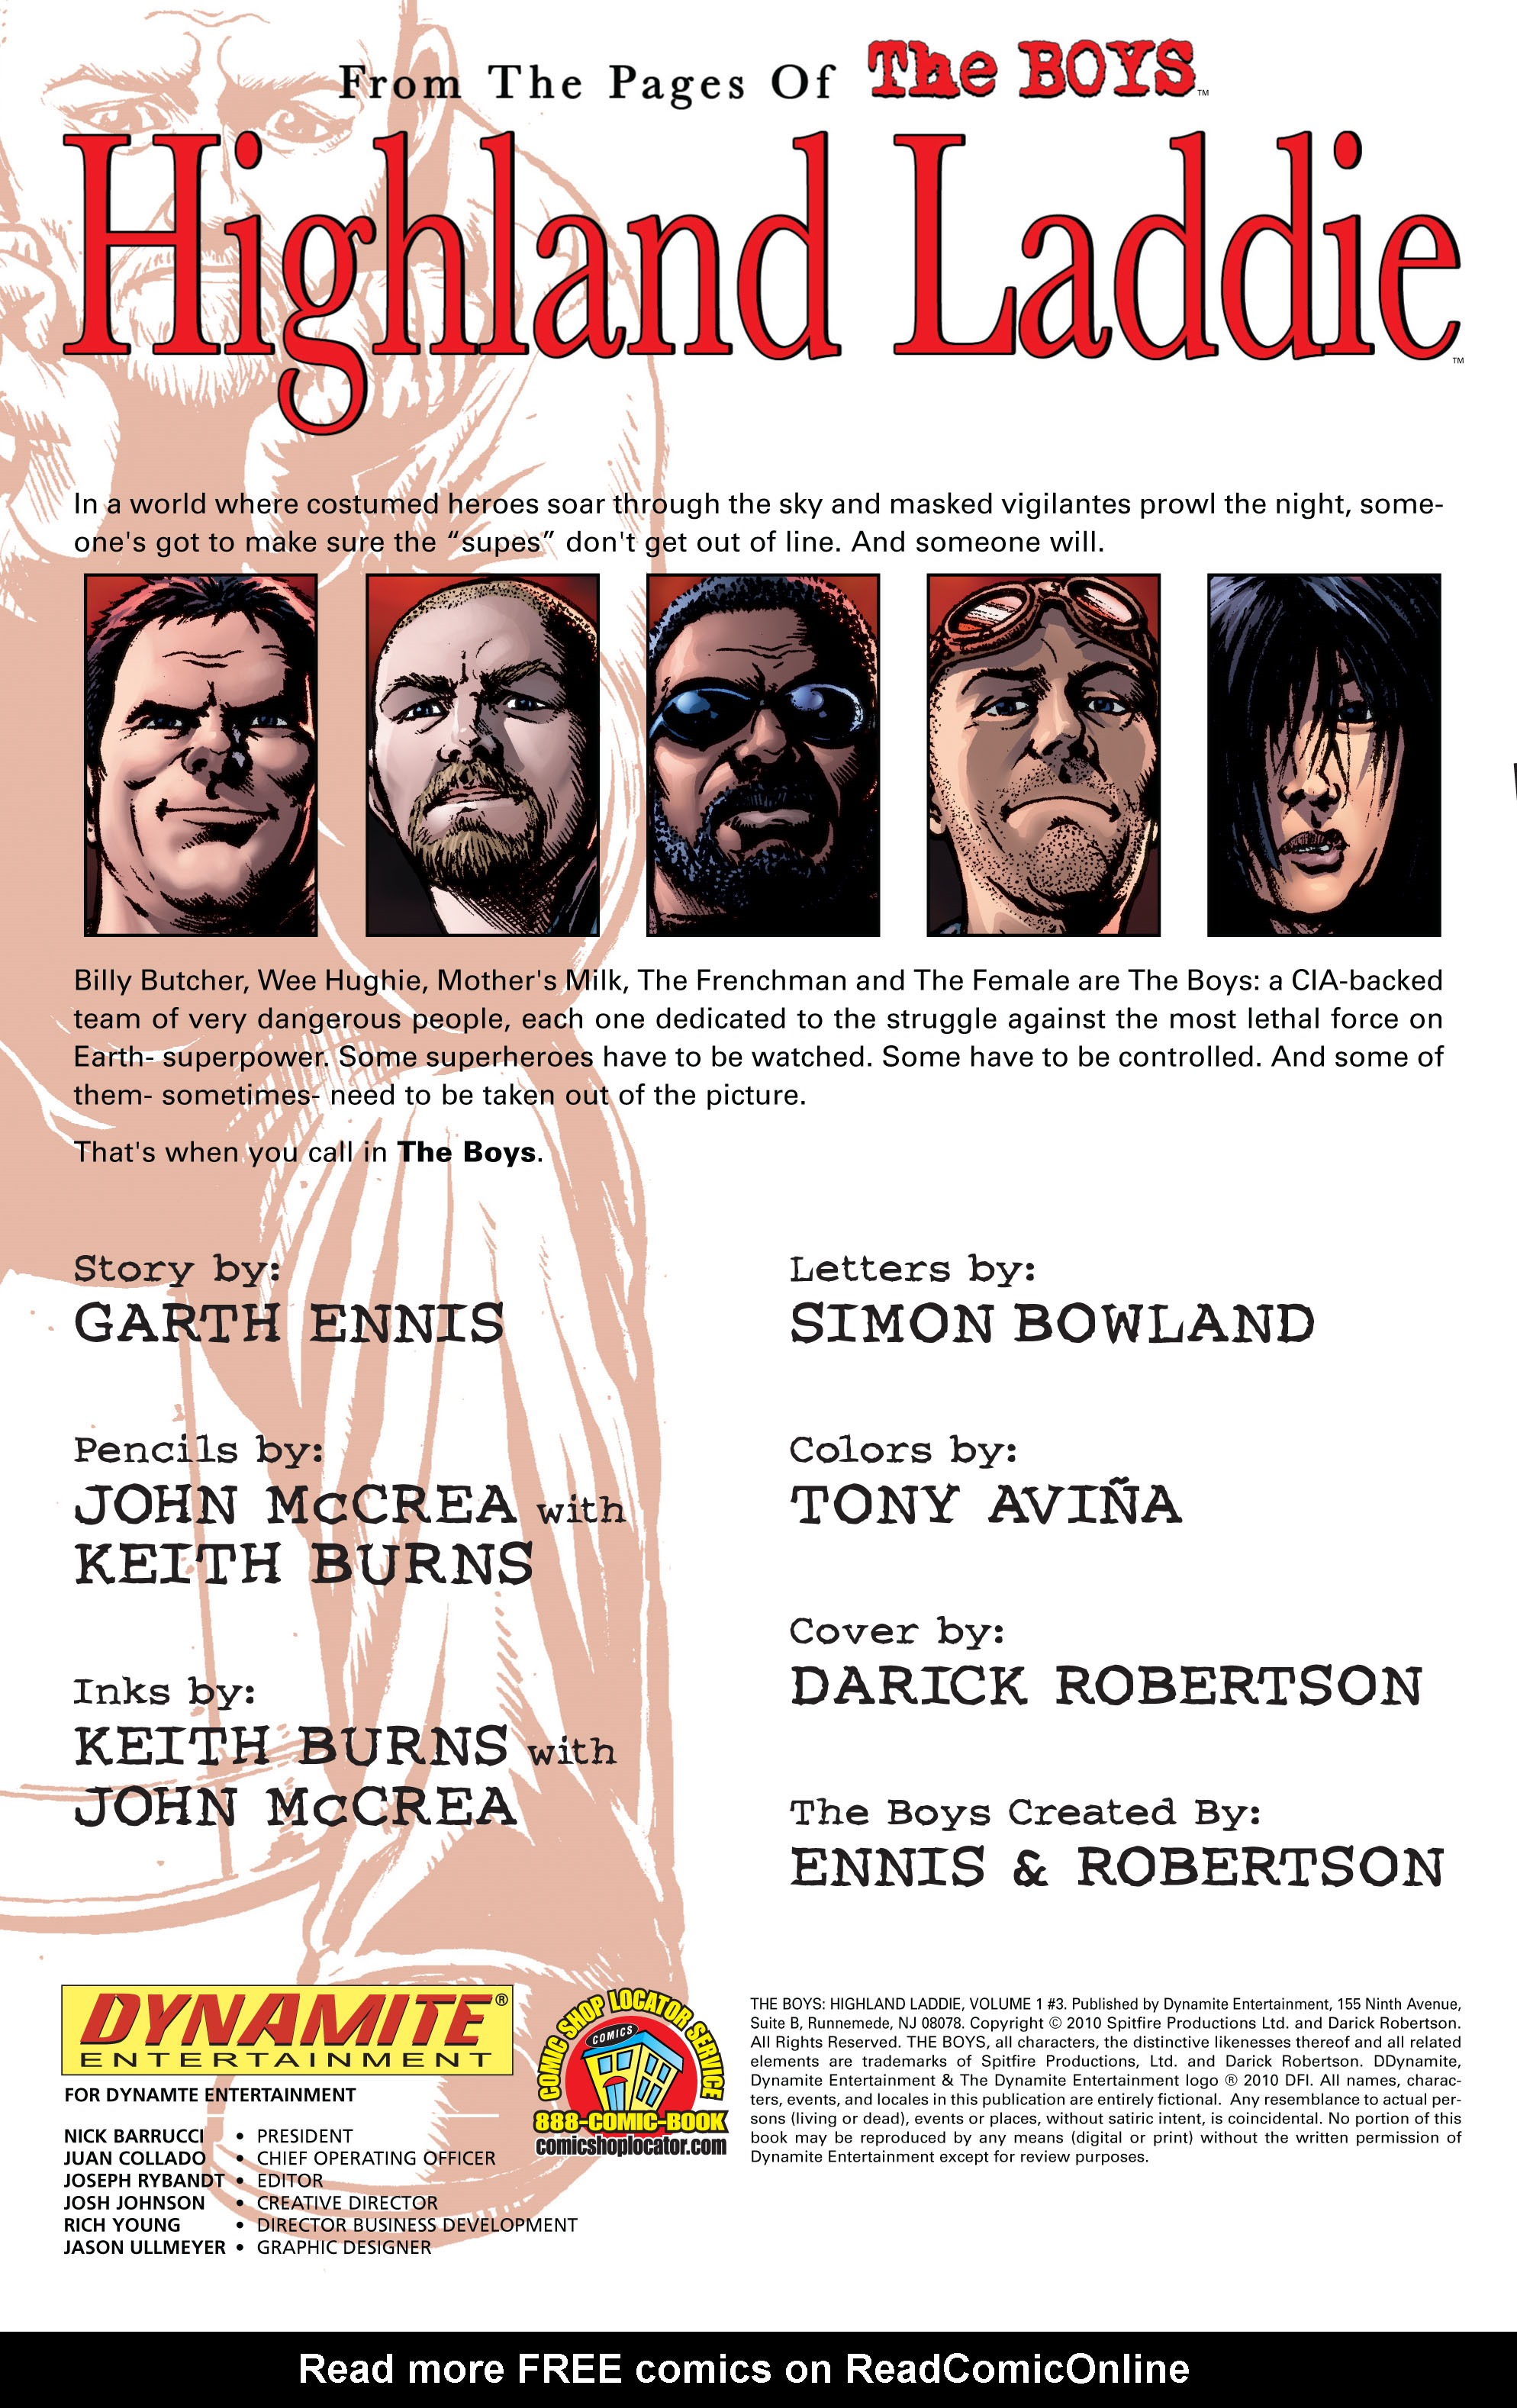 Read online The Boys: Highland Laddie comic -  Issue # TPB - 51